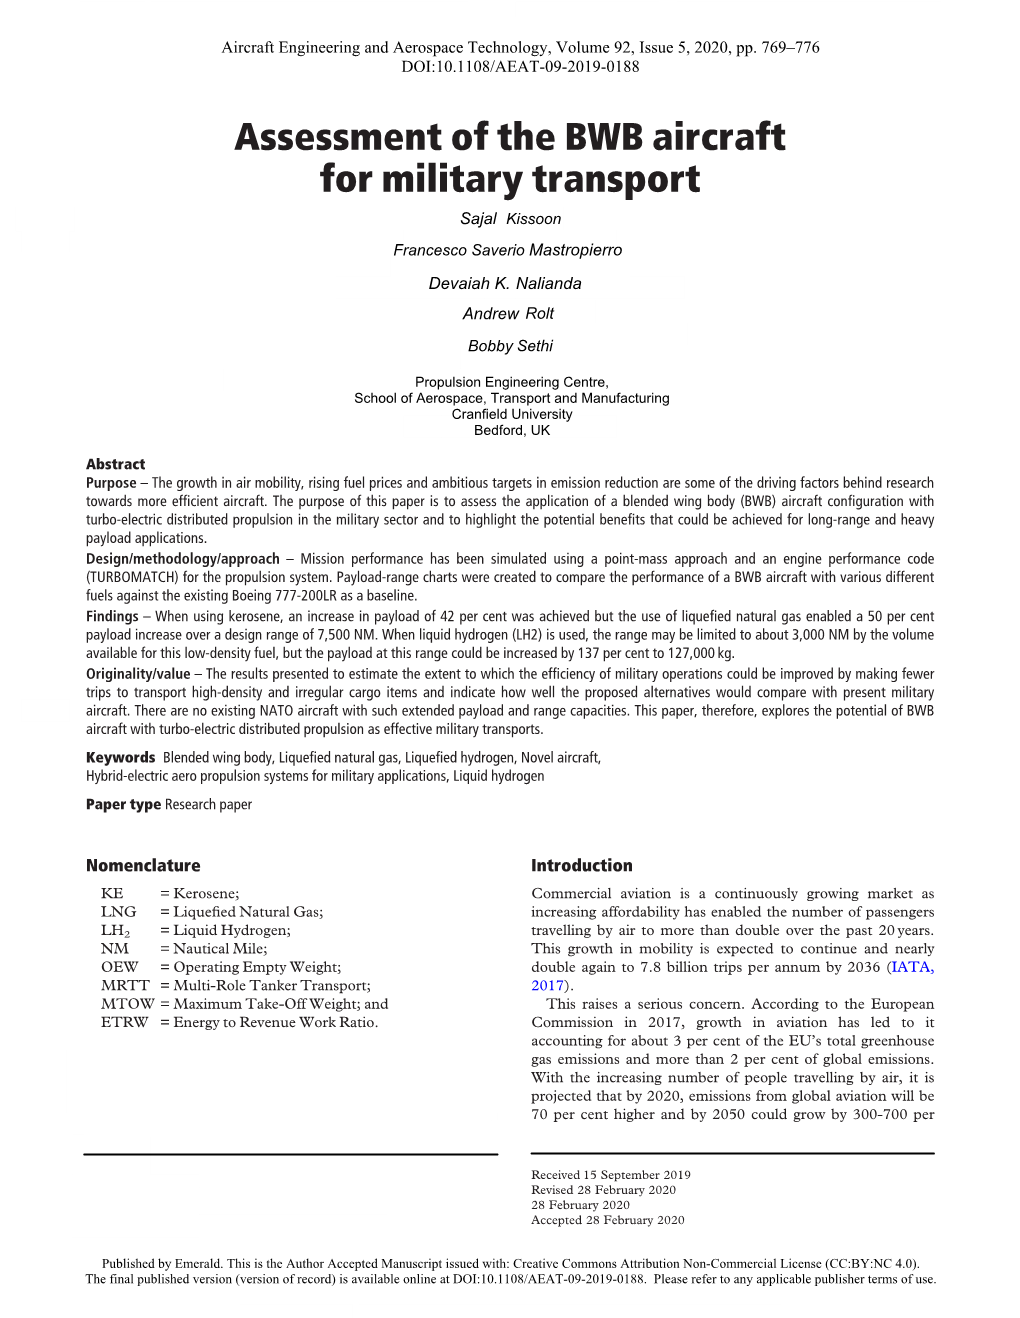 Assessment of the BWB Aircraft for Military Transport